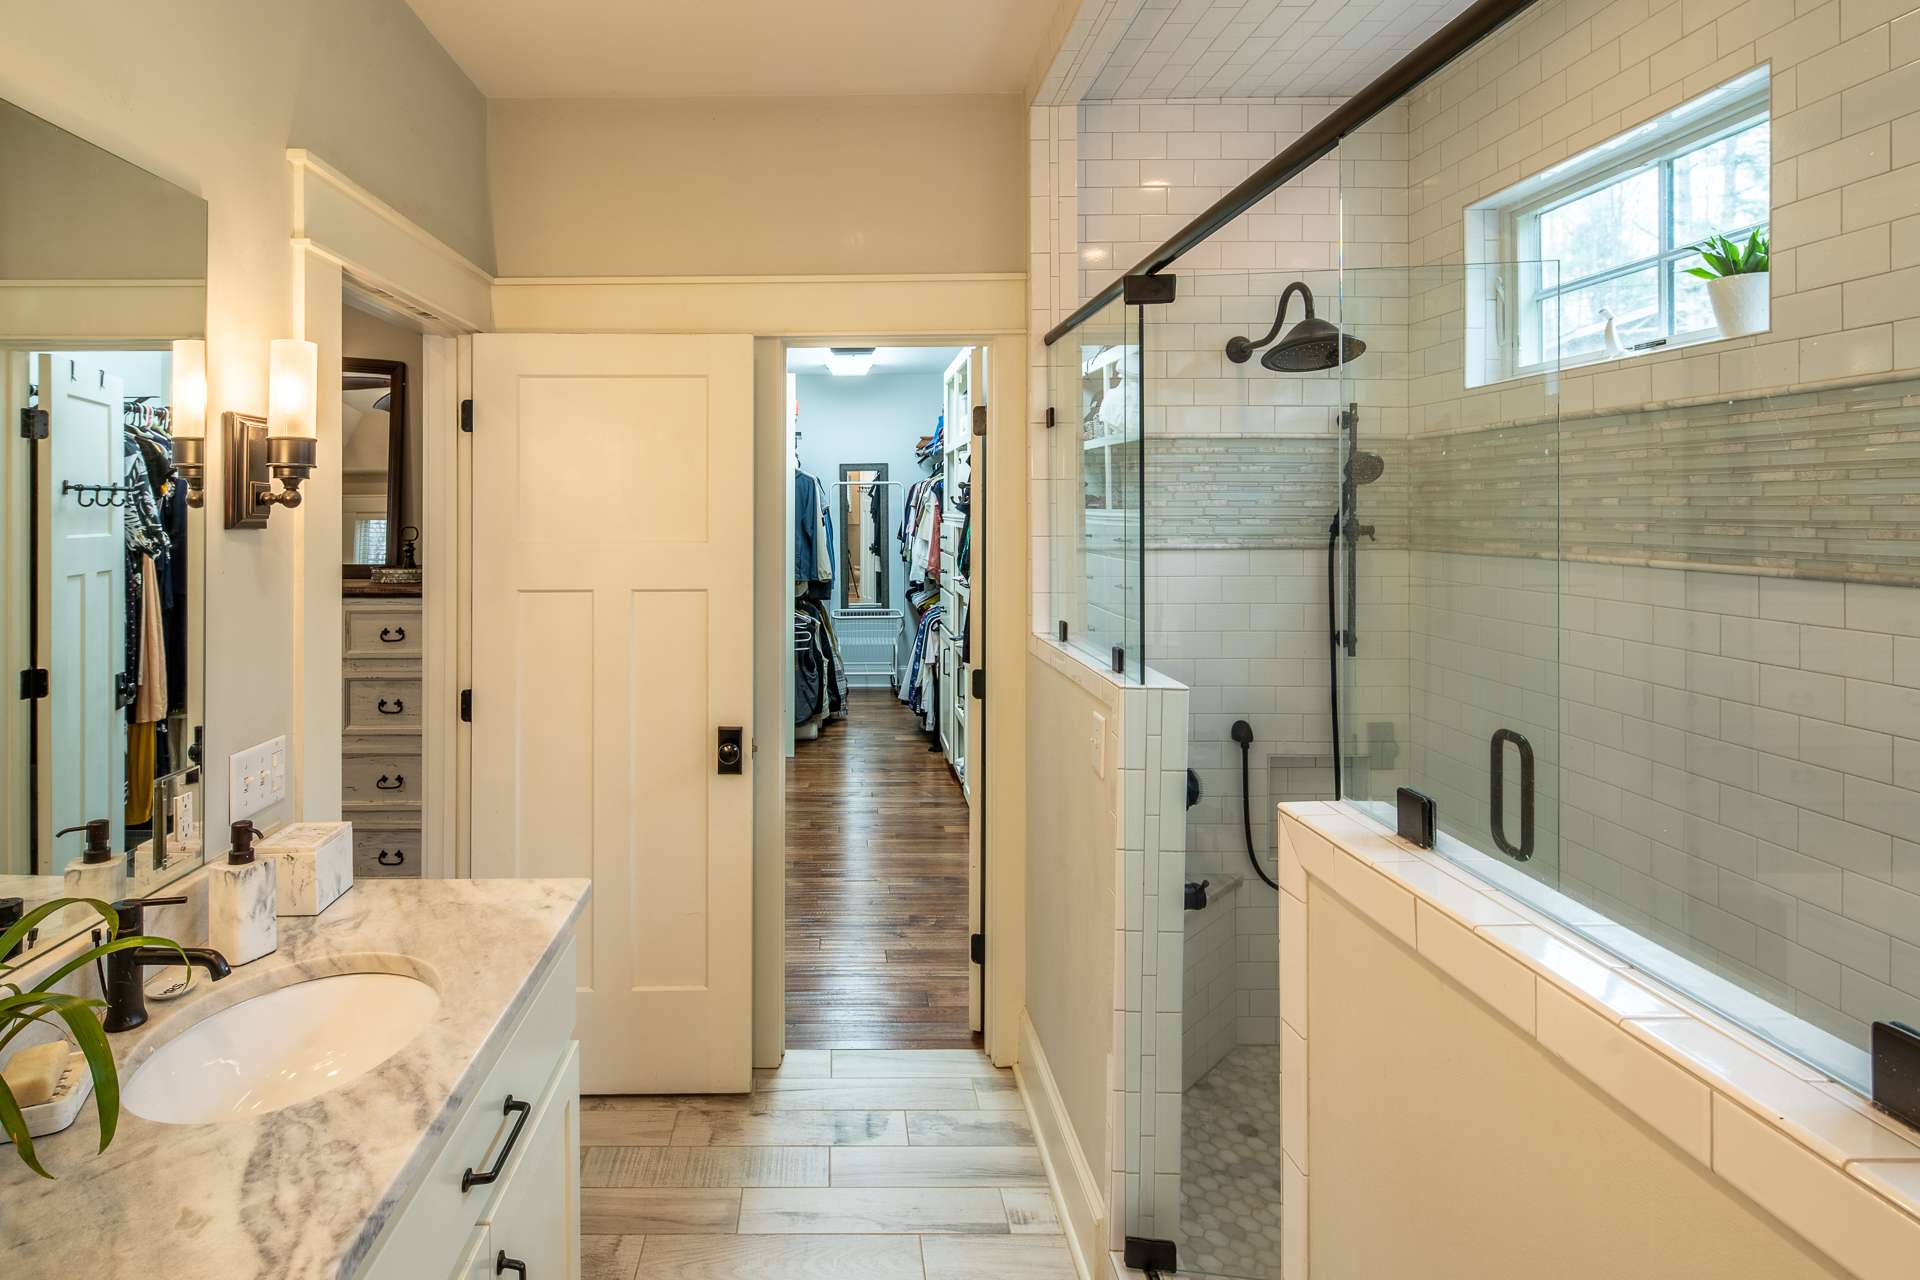 The master bath is nice & bright and offer separate sinks, ample countertop & storage space and a generous size tile shower with four shower heads.